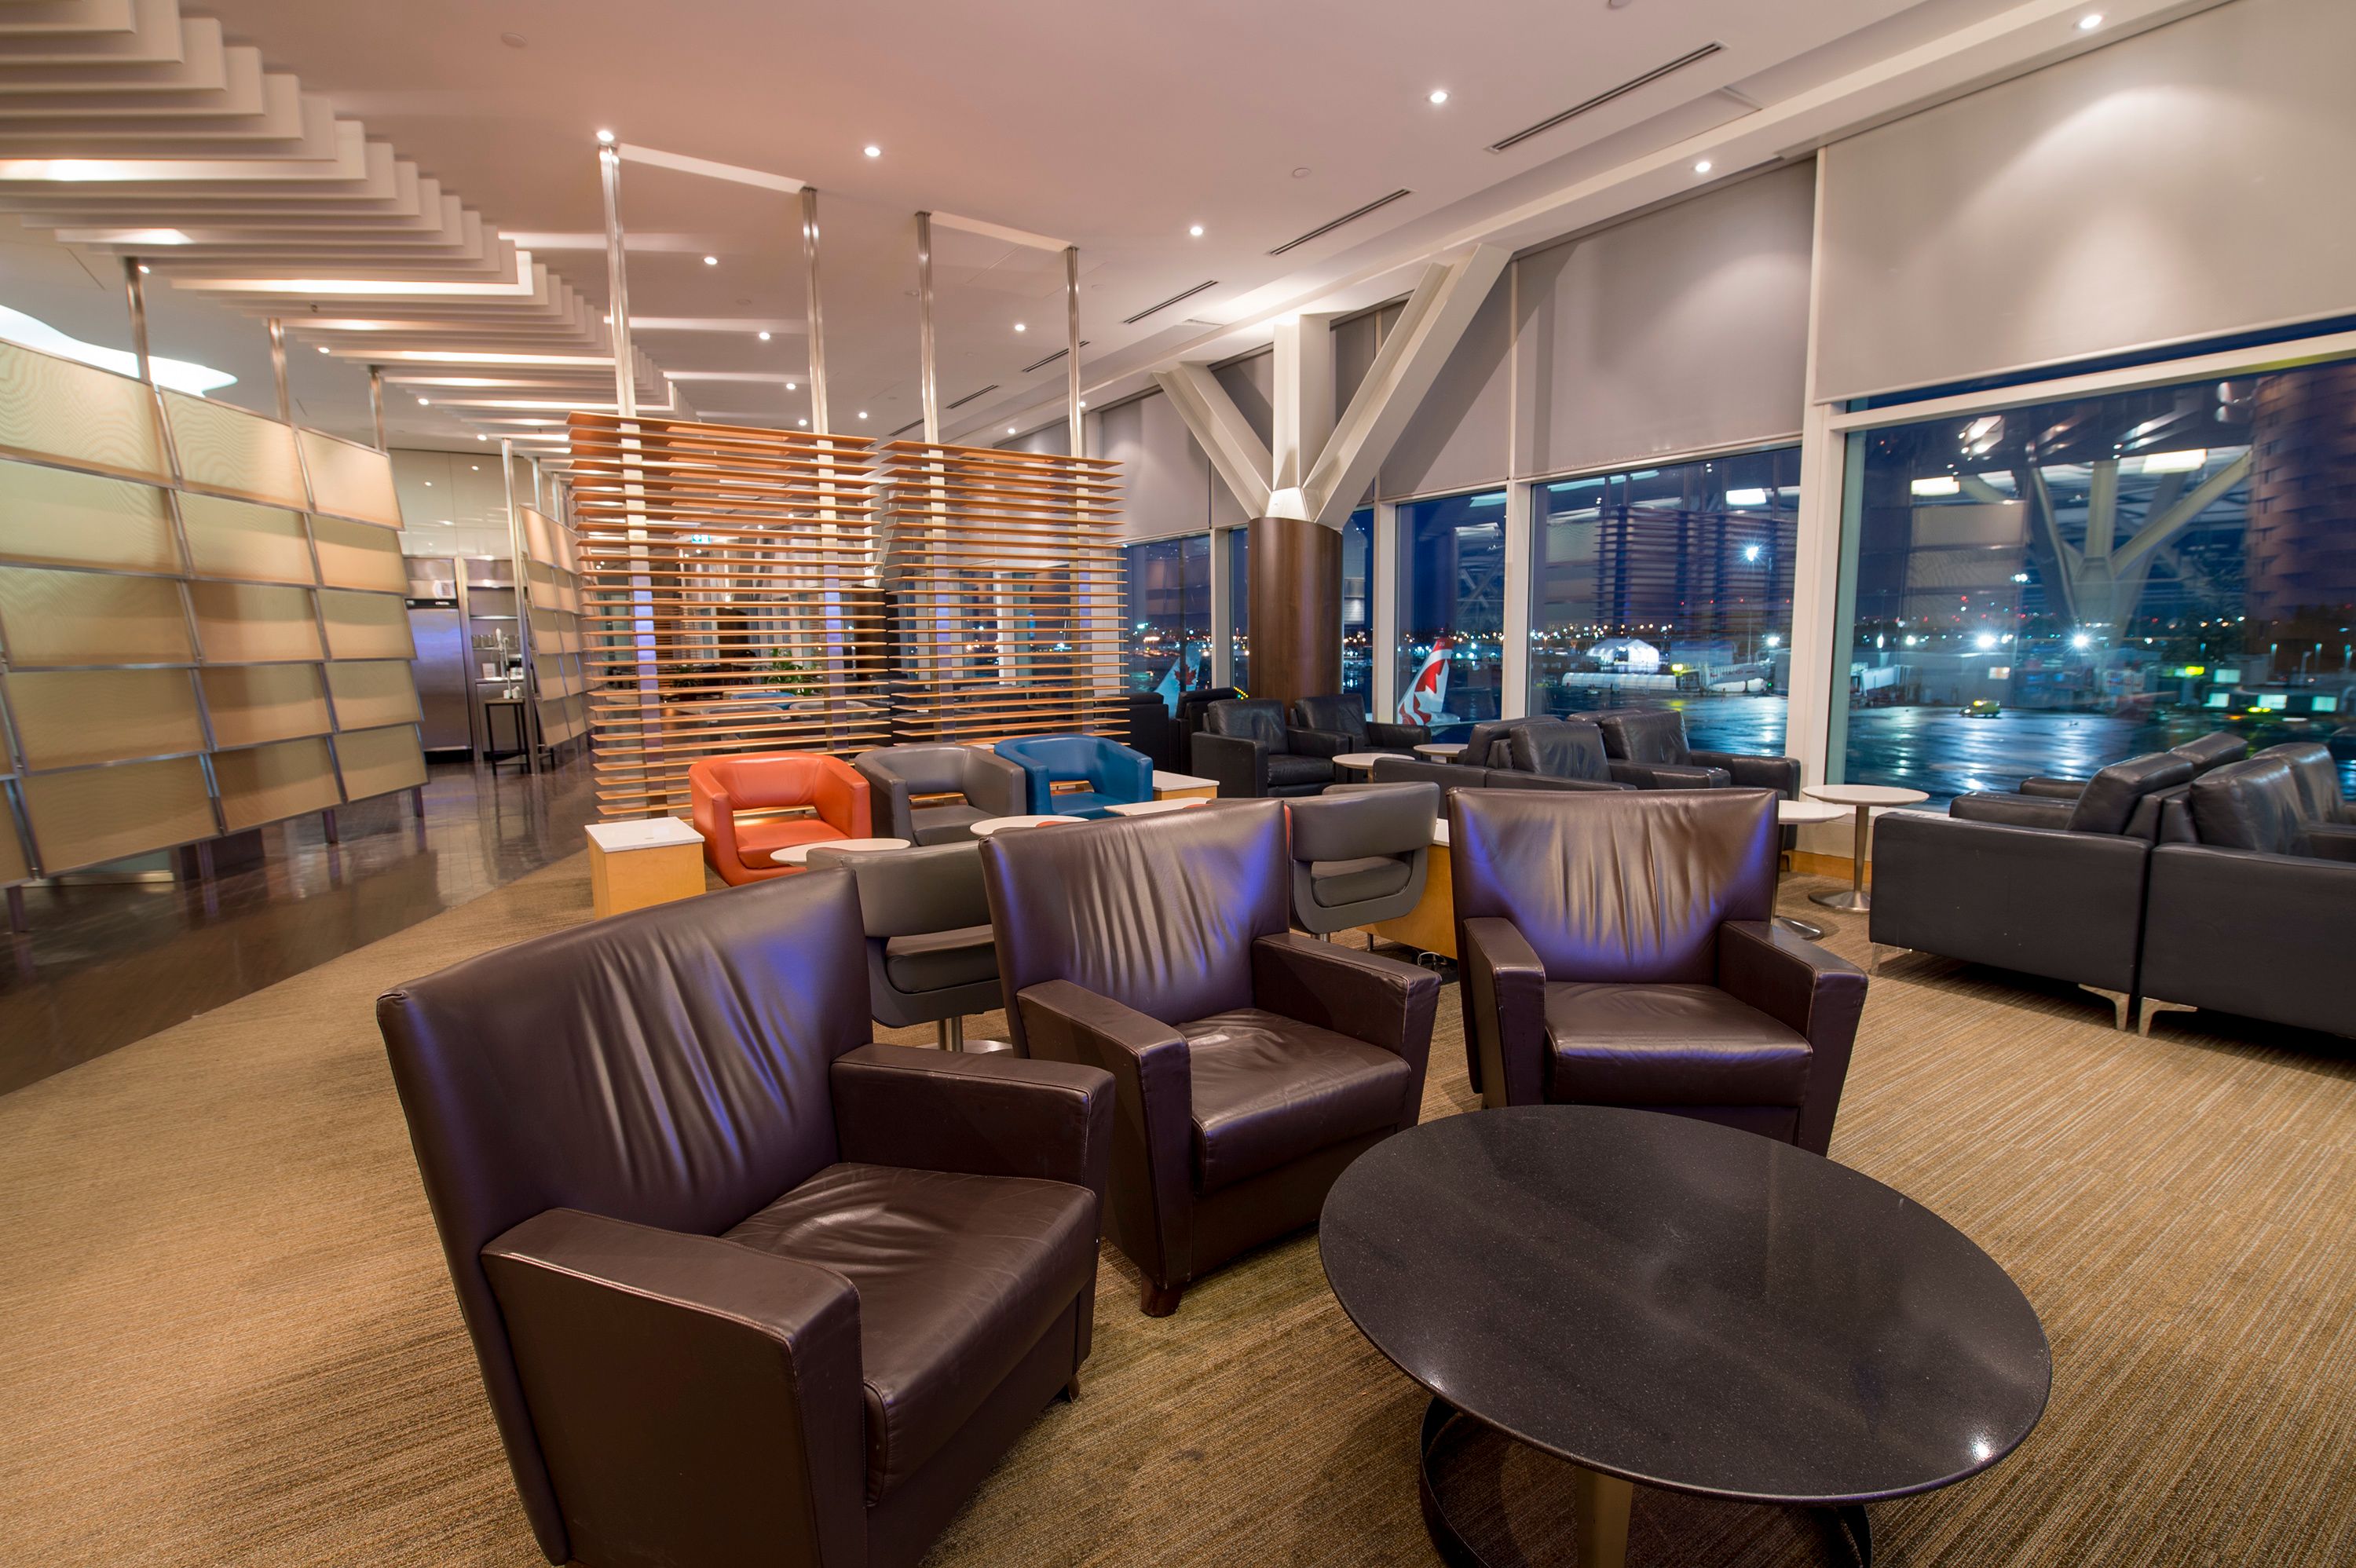 Air Canada's Maple Leaf lounge in Vancouver